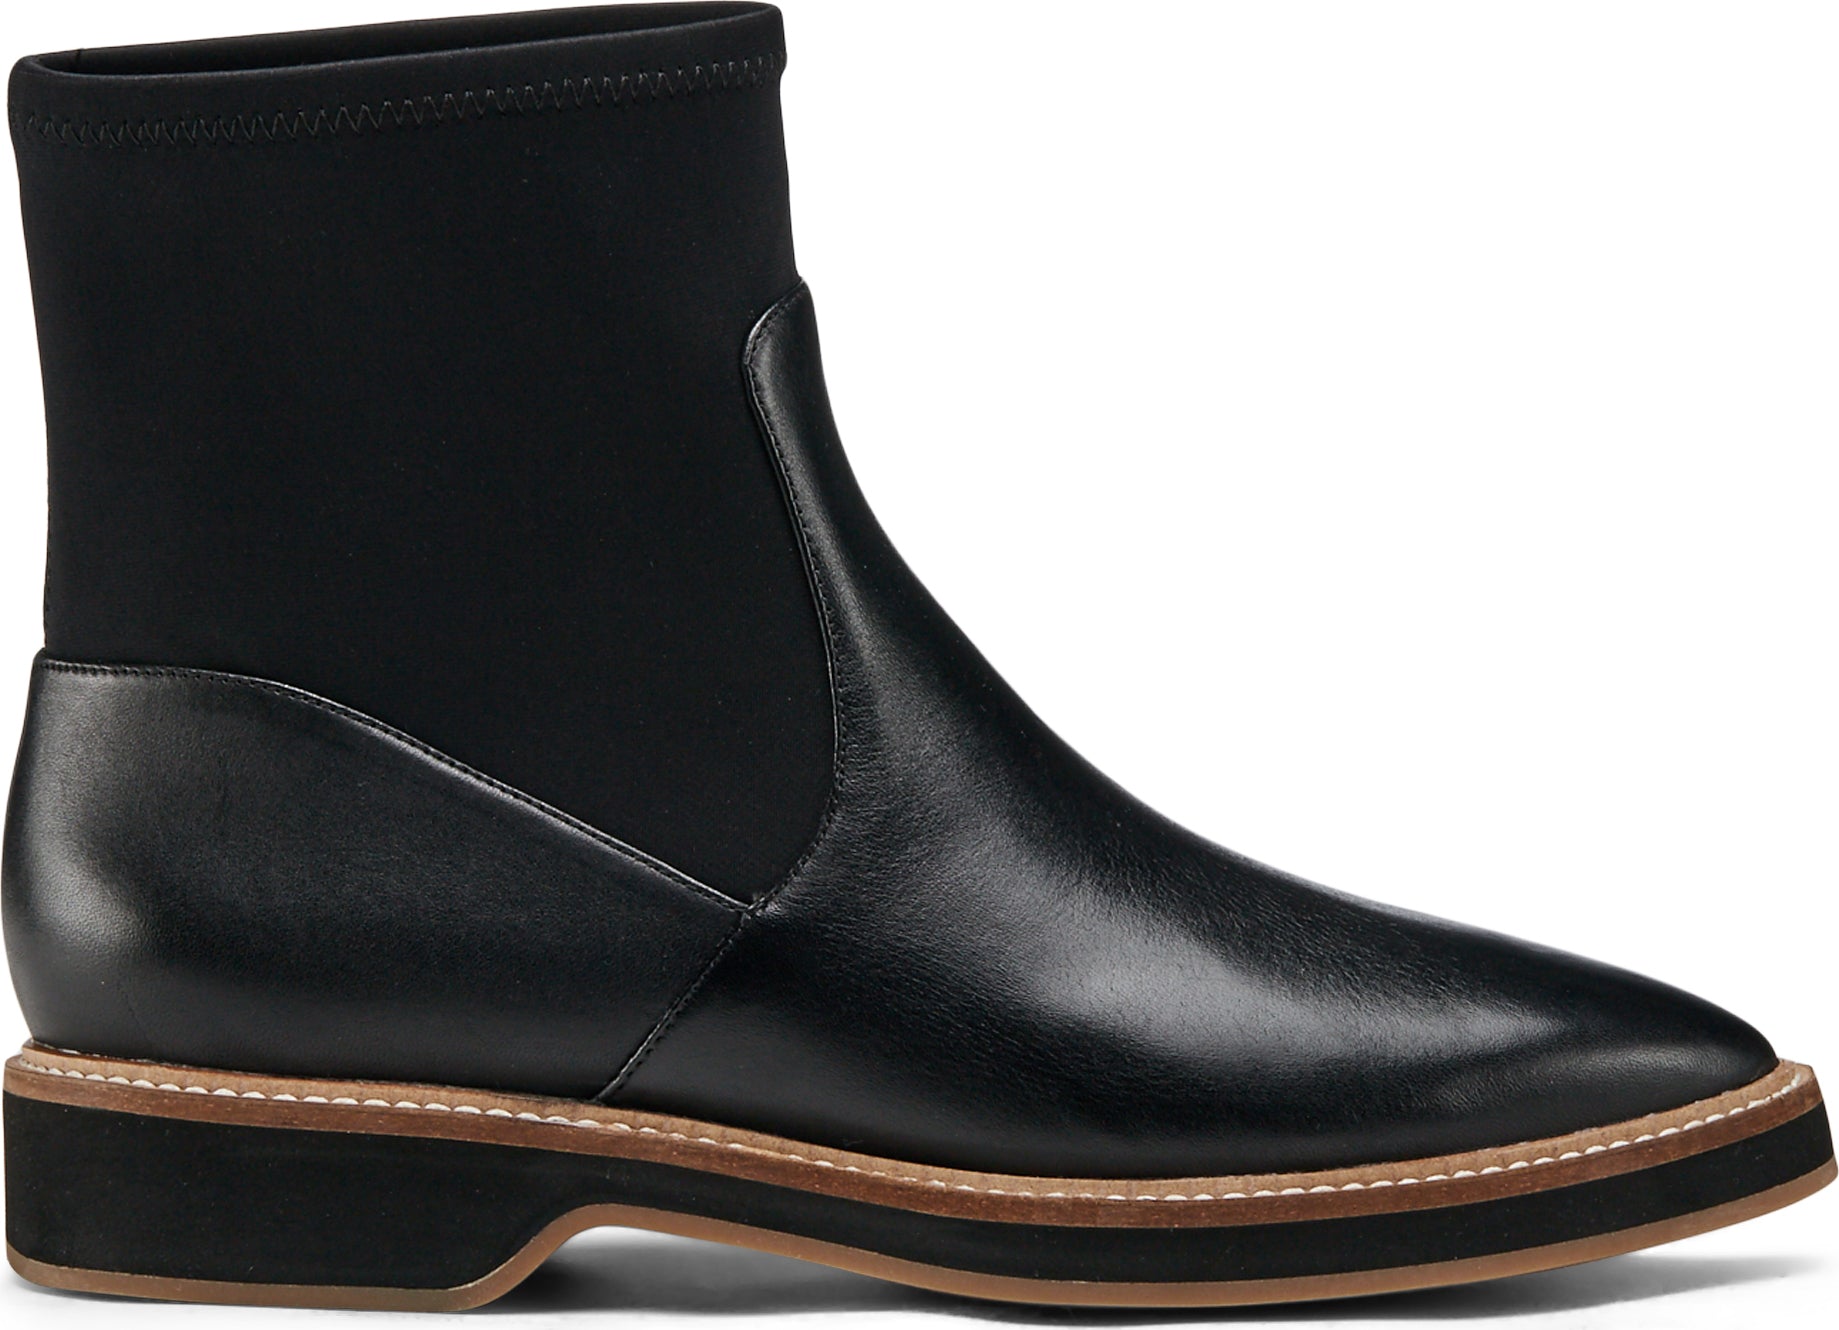 cole haan work boots